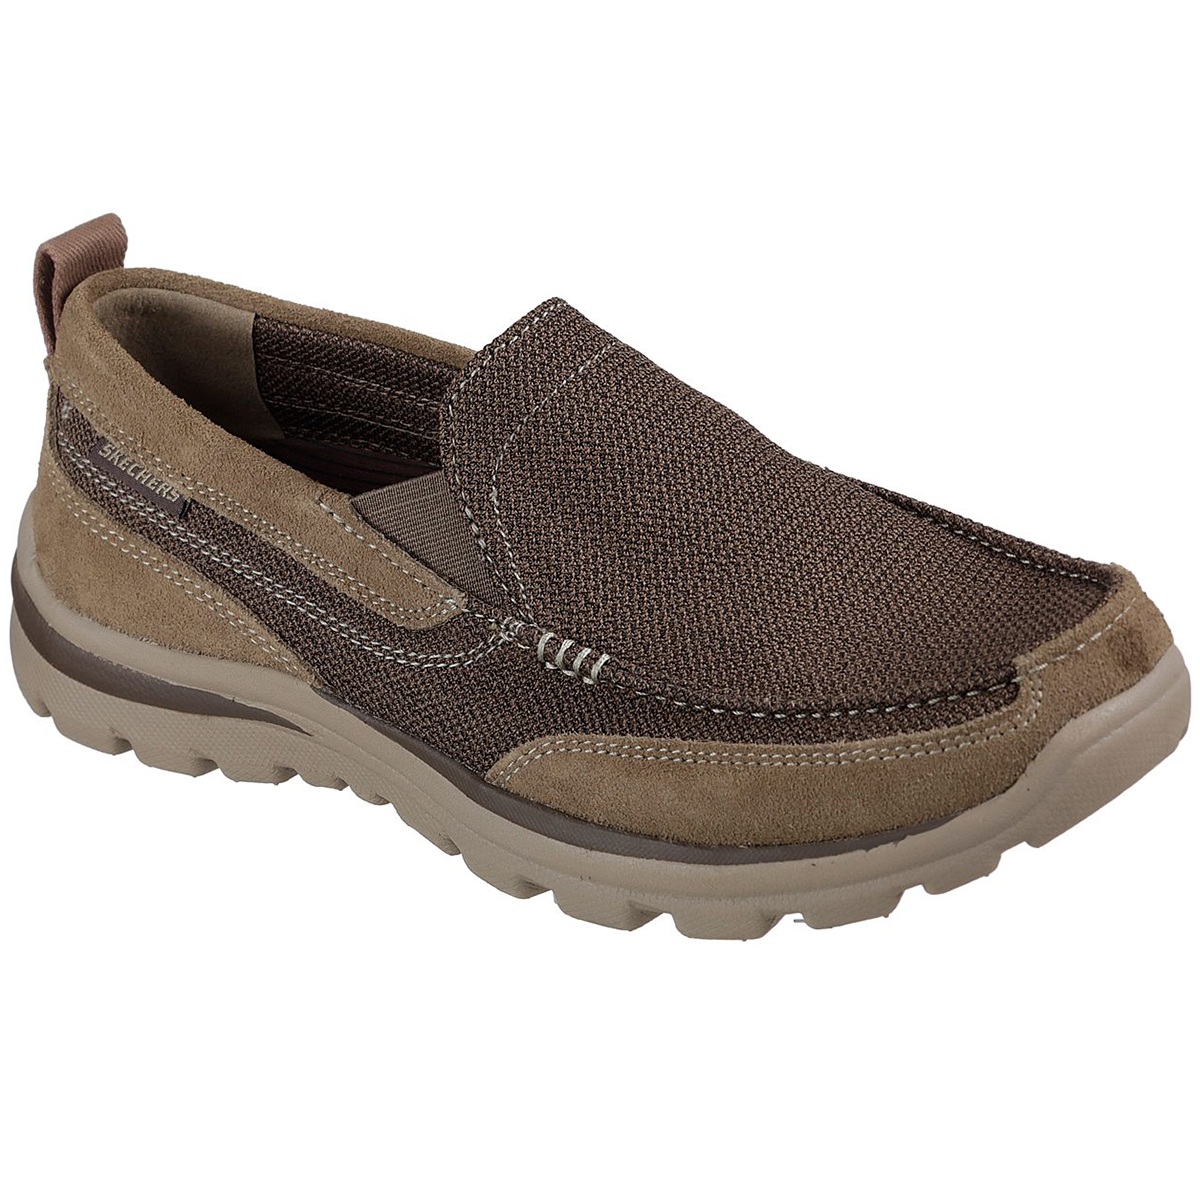 Skechers Men's Relaxed Fit: Superior- Milford Slip-On Shoes - Brown, 10